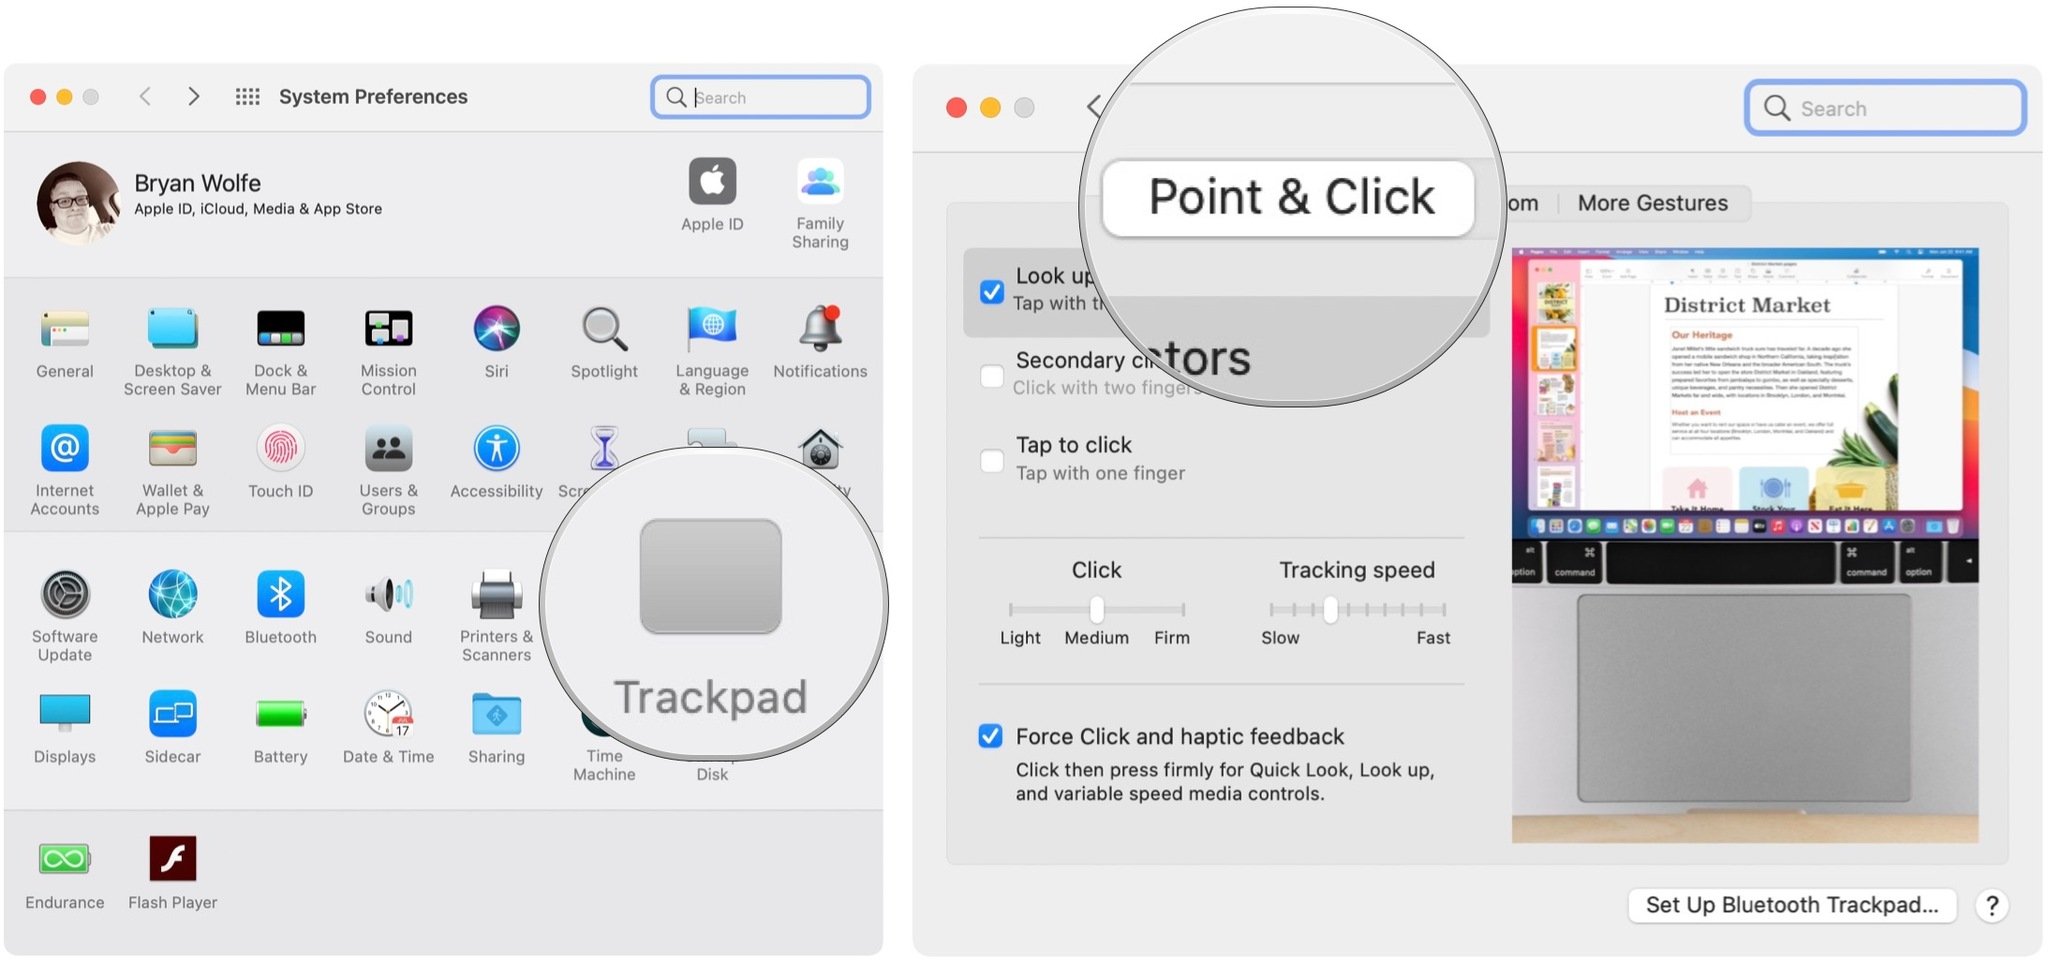 To speed up or slow down tracking on a Mac trackpad, click Trackpad, then Point & Click.